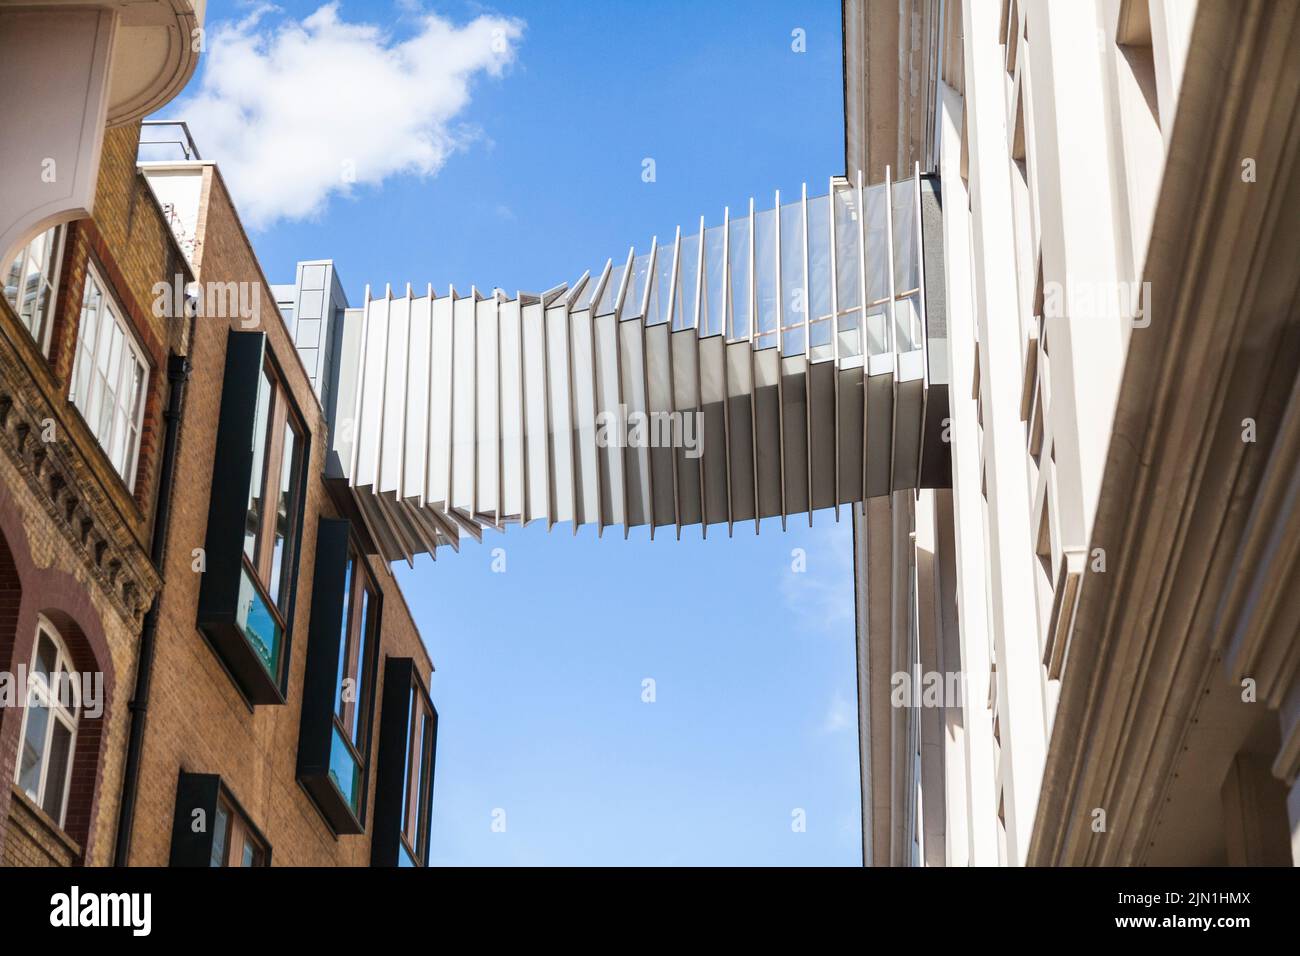 An overhead walkway leading off the Royal Opera House in Covent Garden, London,UK Stock Photo